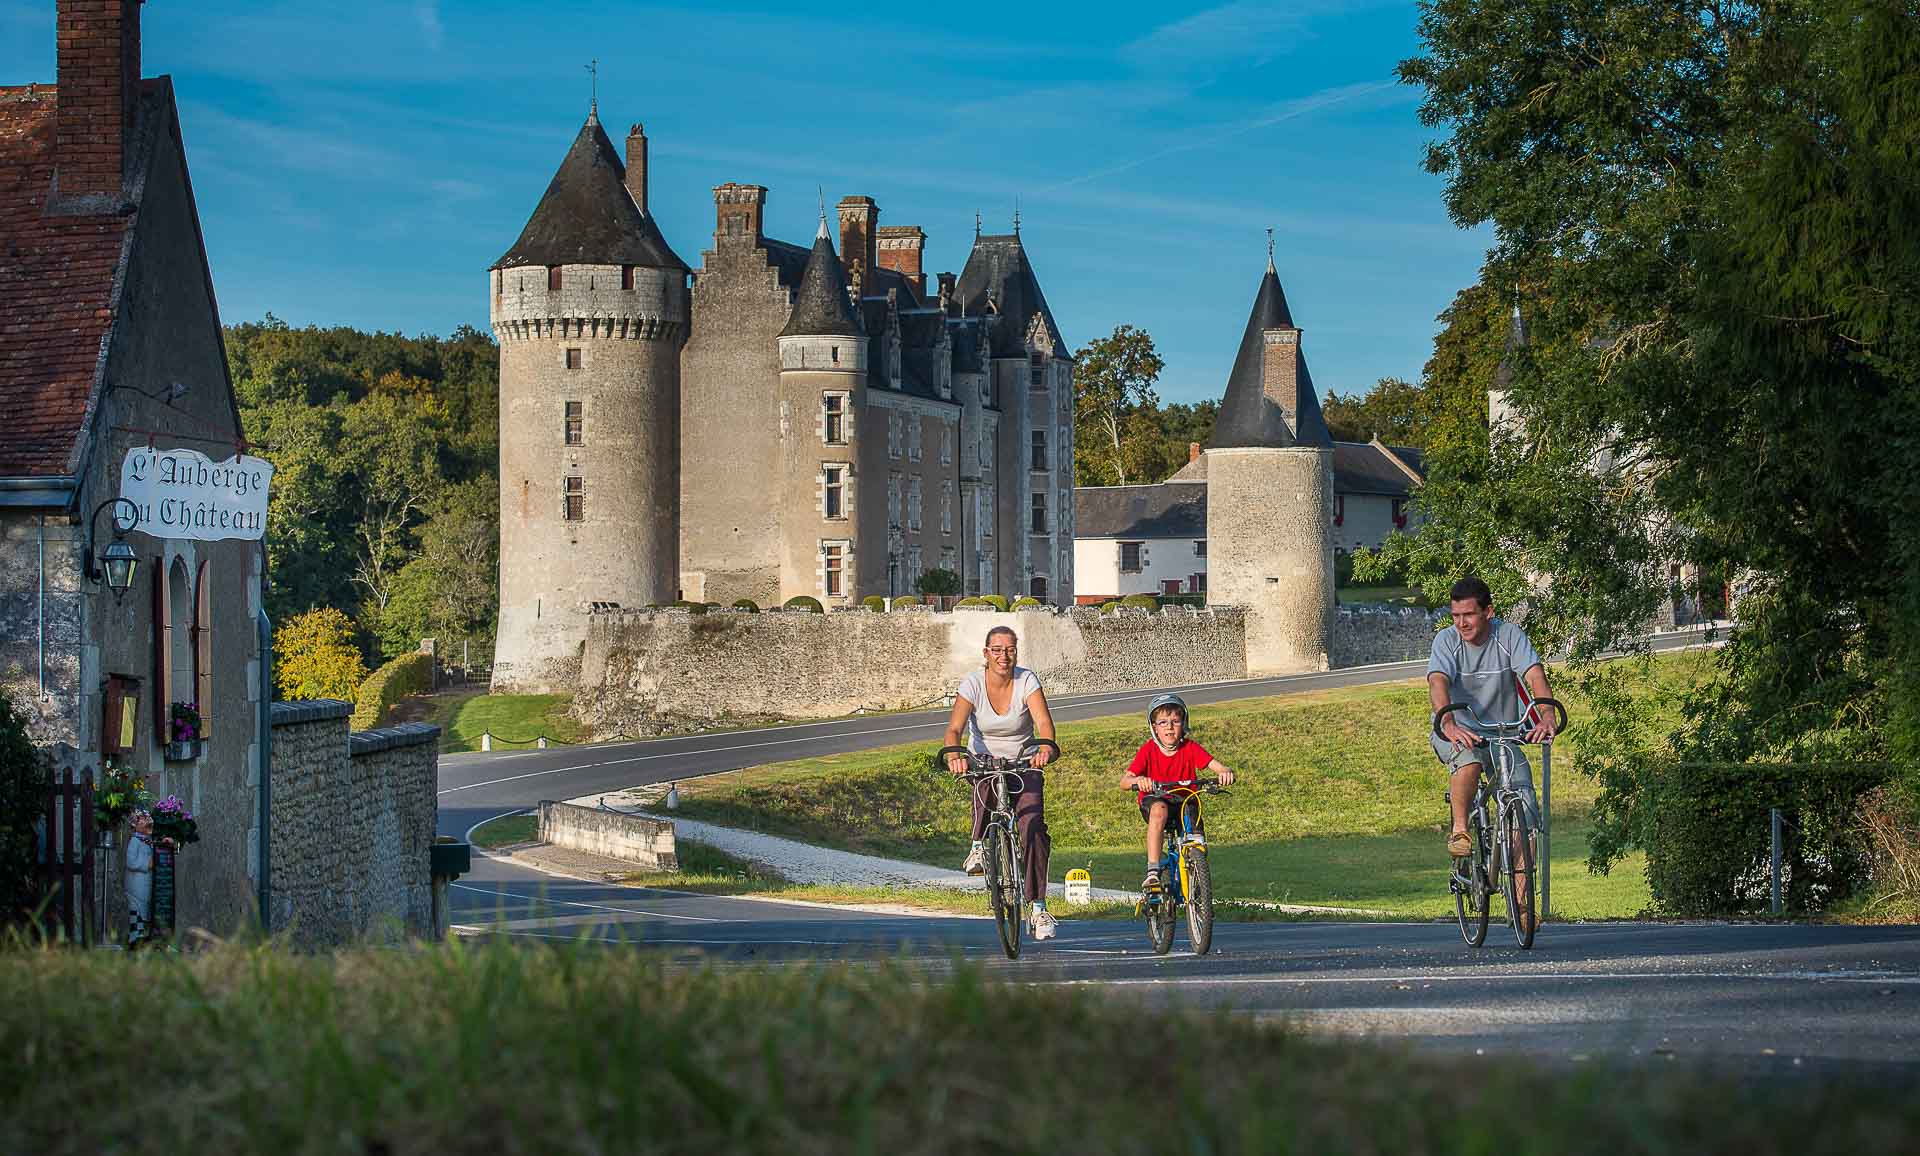 The castle of Montpoupon - Charming chateaux in Loire Valley